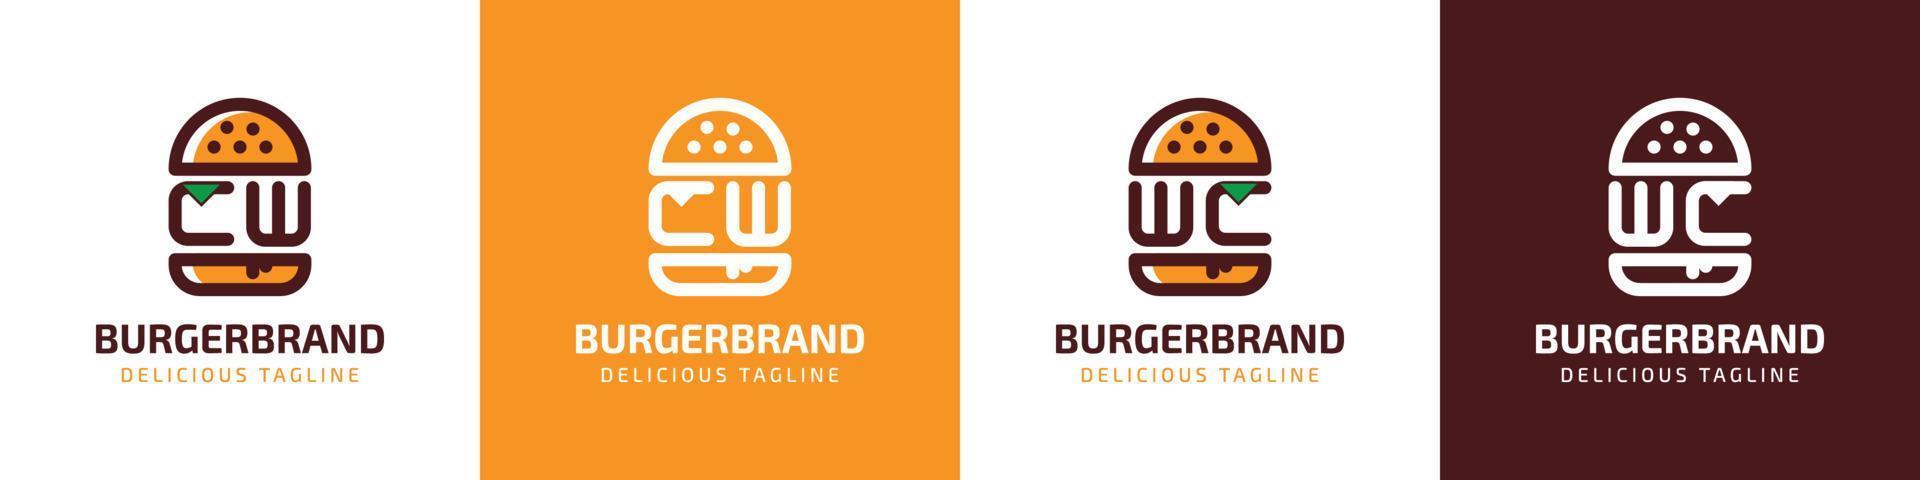 Letter CW and WC Burger Logo, suitable for any business related to burger with CW or WC initials. vector